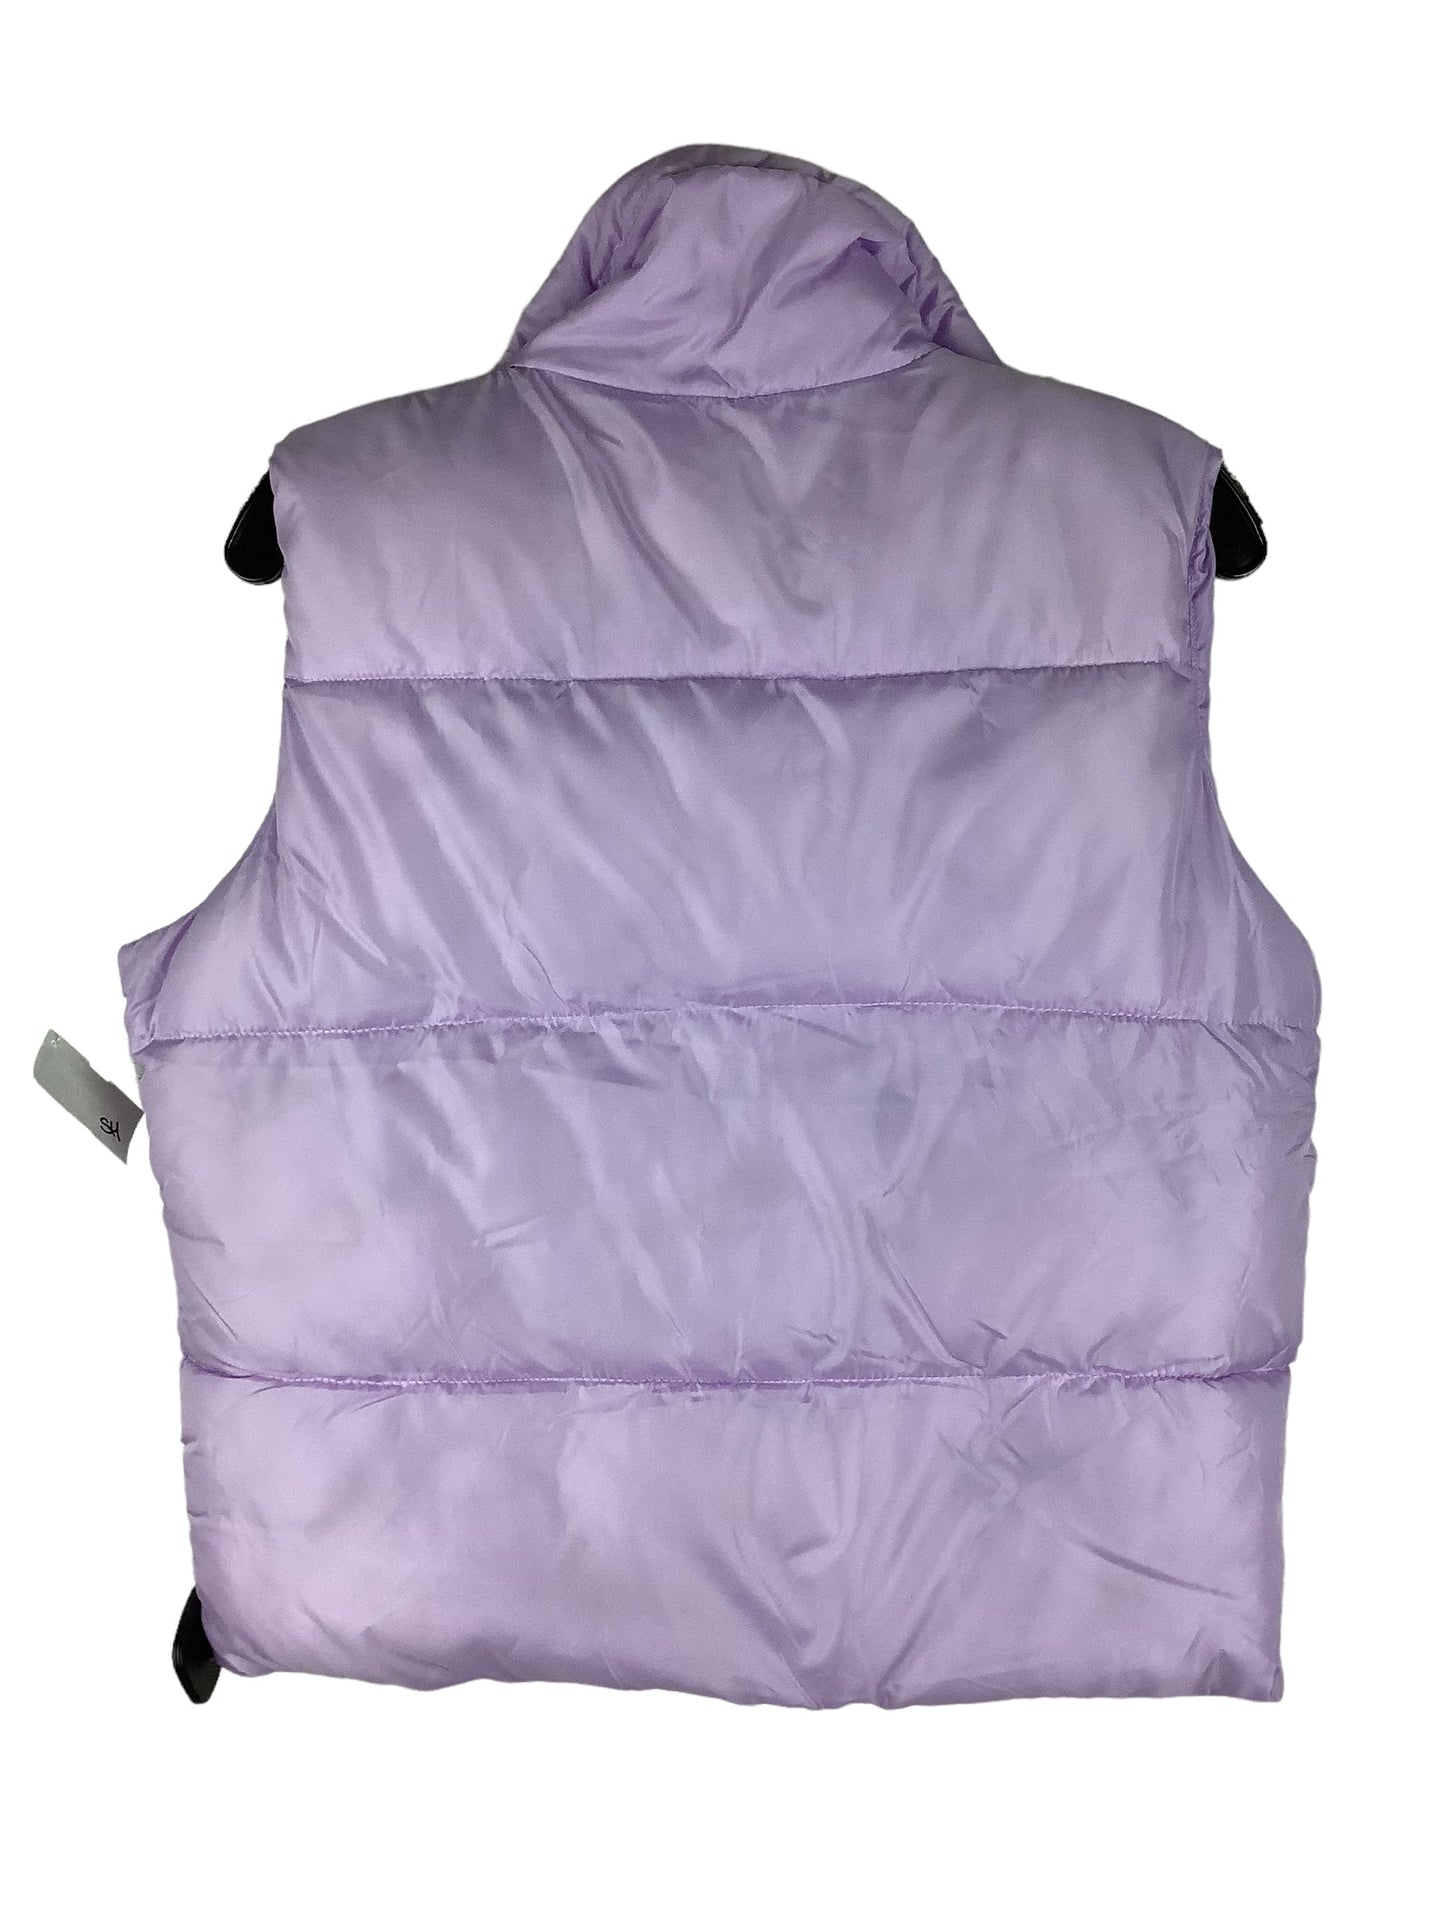 Vest Puffer & Quilted By Us Polo Assoc  Size: M